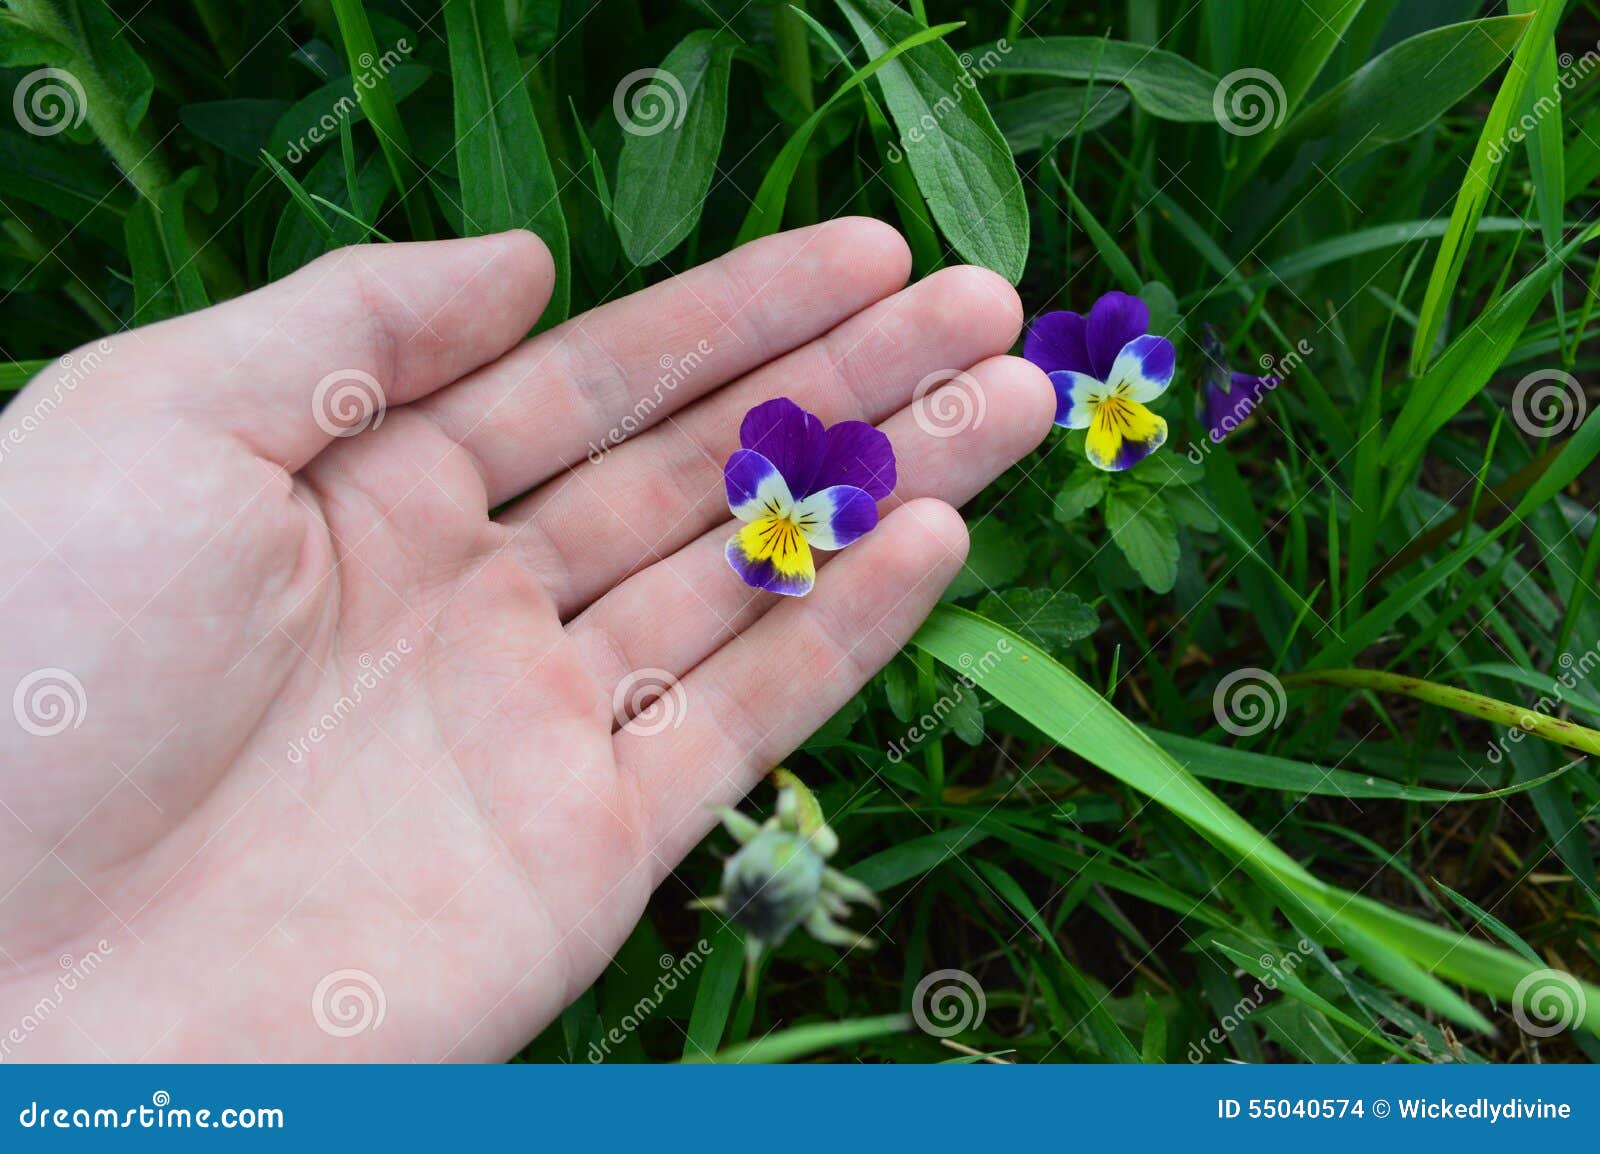 holding flowers picture person purple flower 55040574